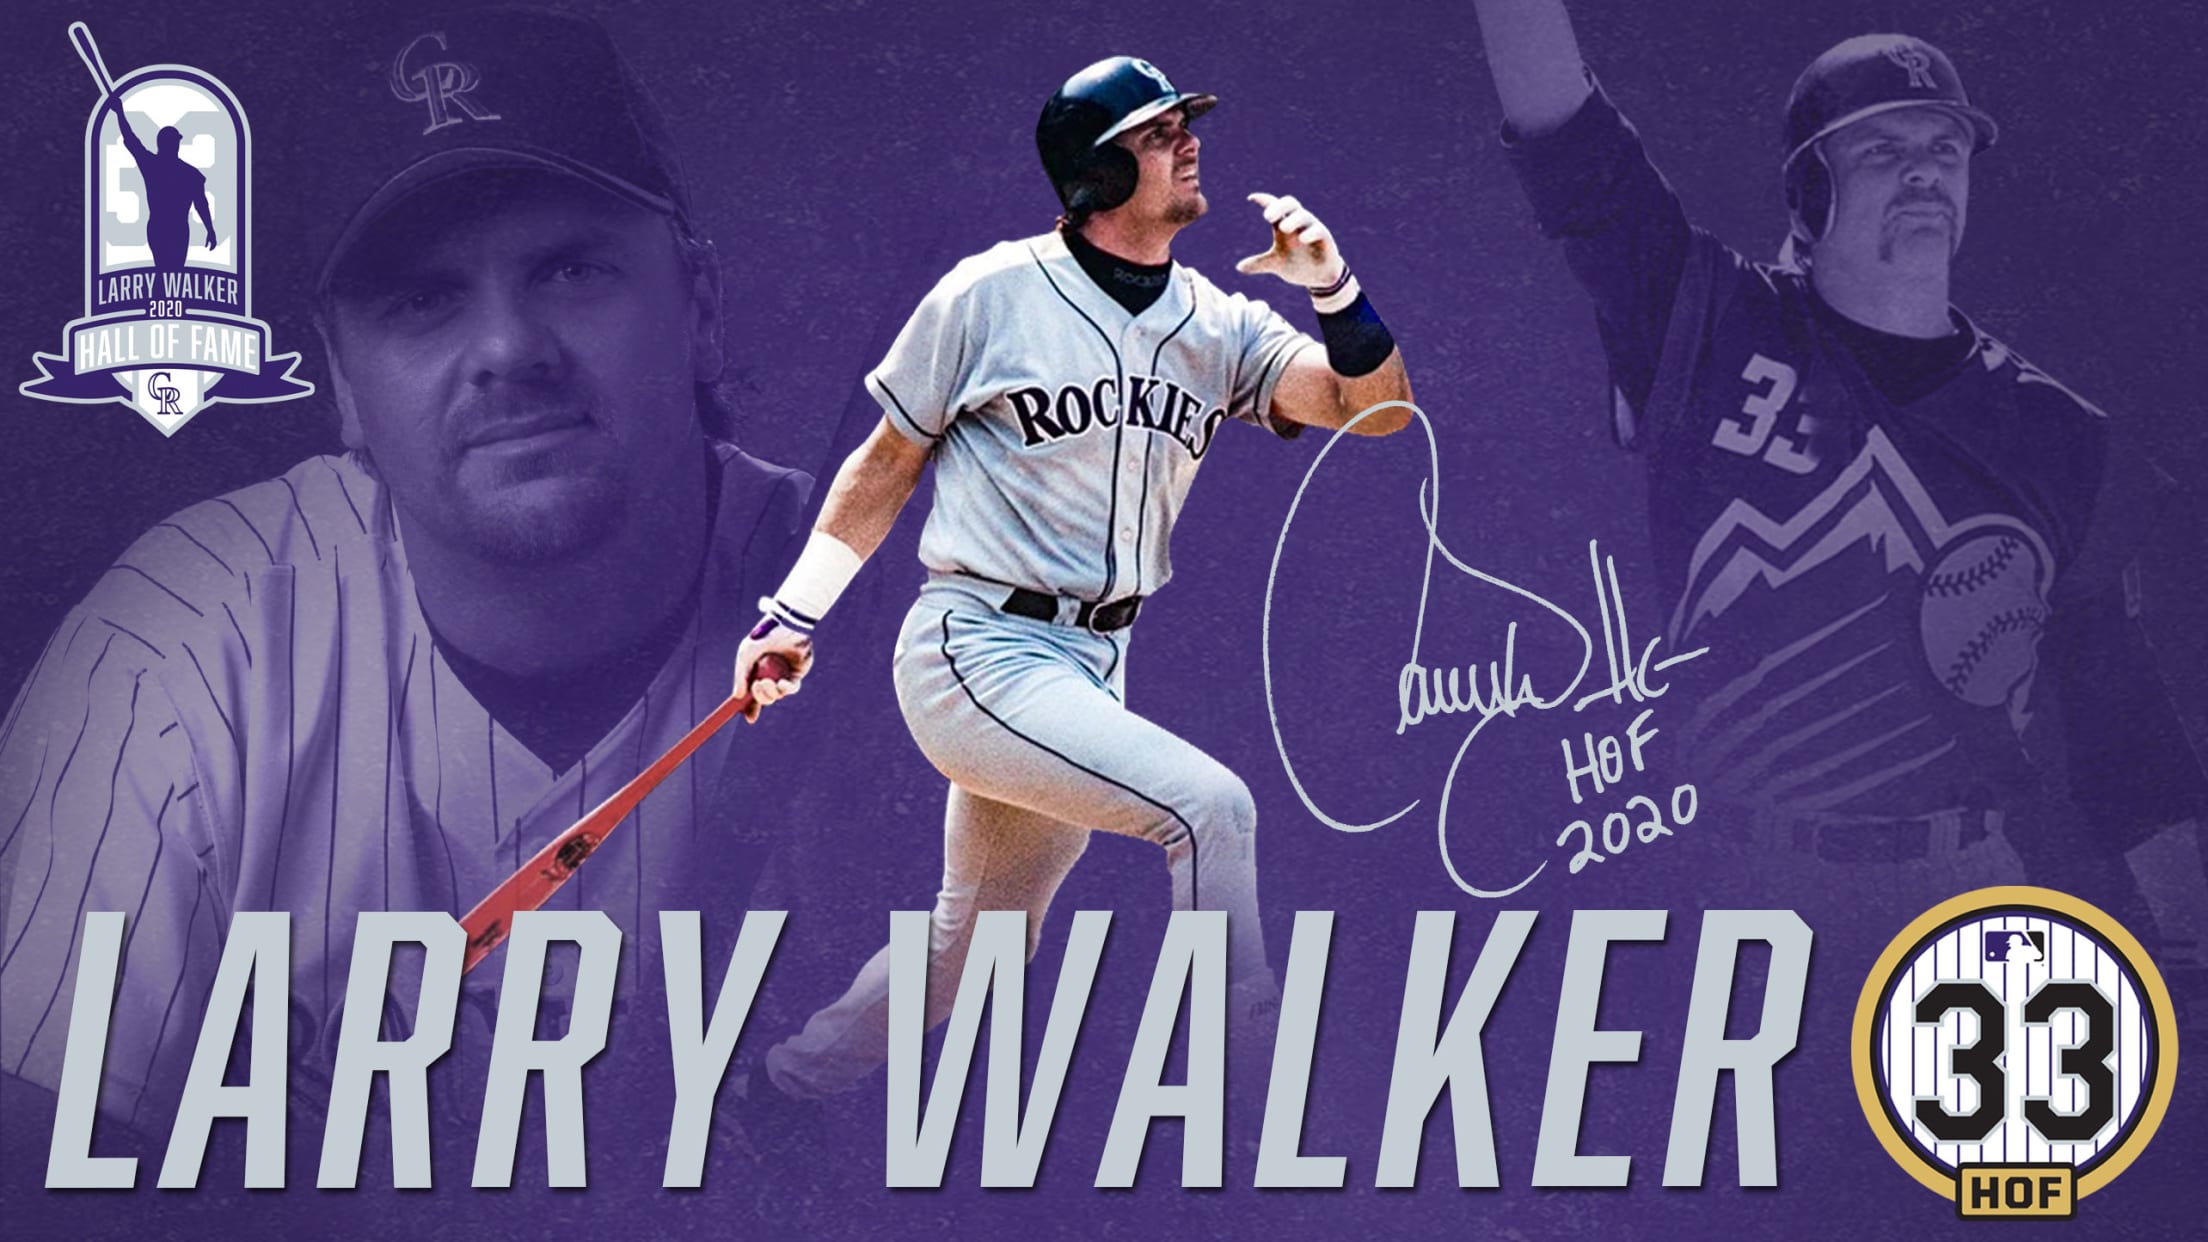 Rockies' Larry Walker blasts 19 dingers, but finishes second at